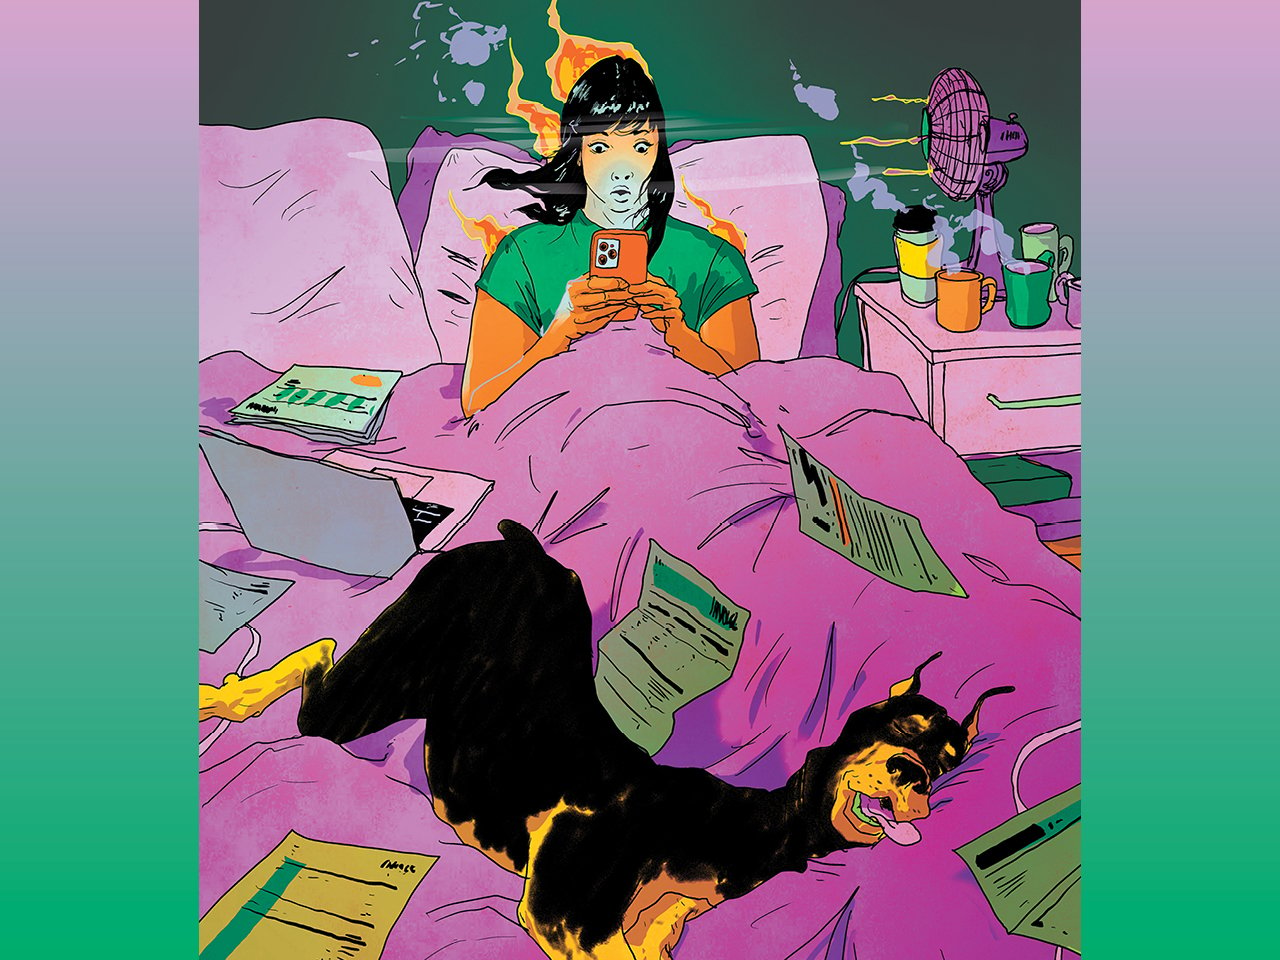 An illustration of a woman in bed, on her phone with a fan blowing at her and a dog at her feet, depicting the new reasons we aren't sleeping well.